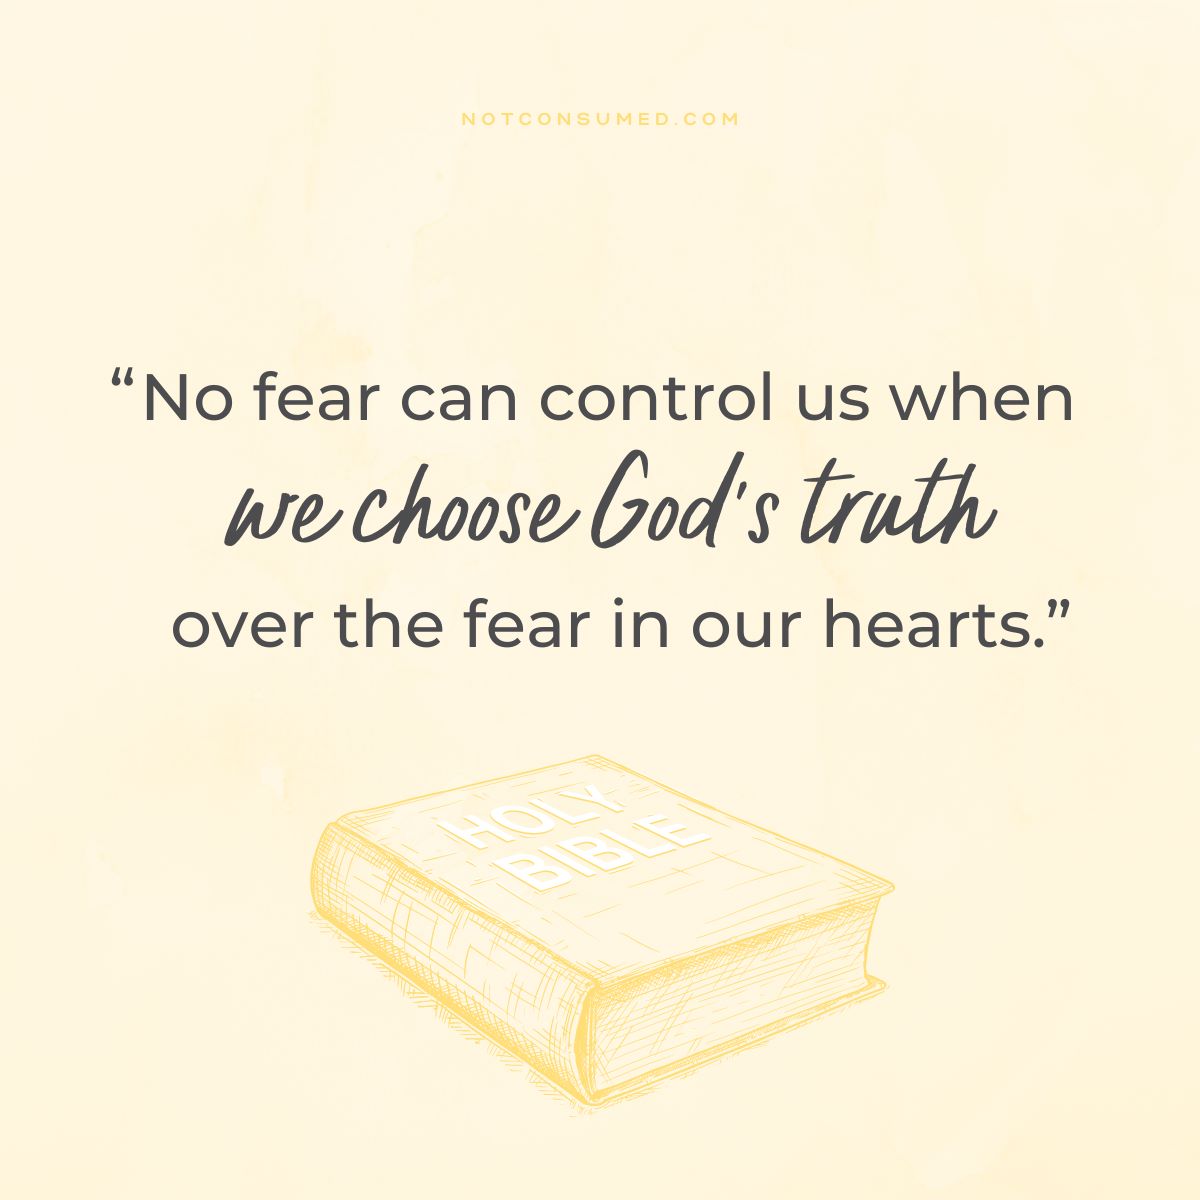 No fear can control us quote